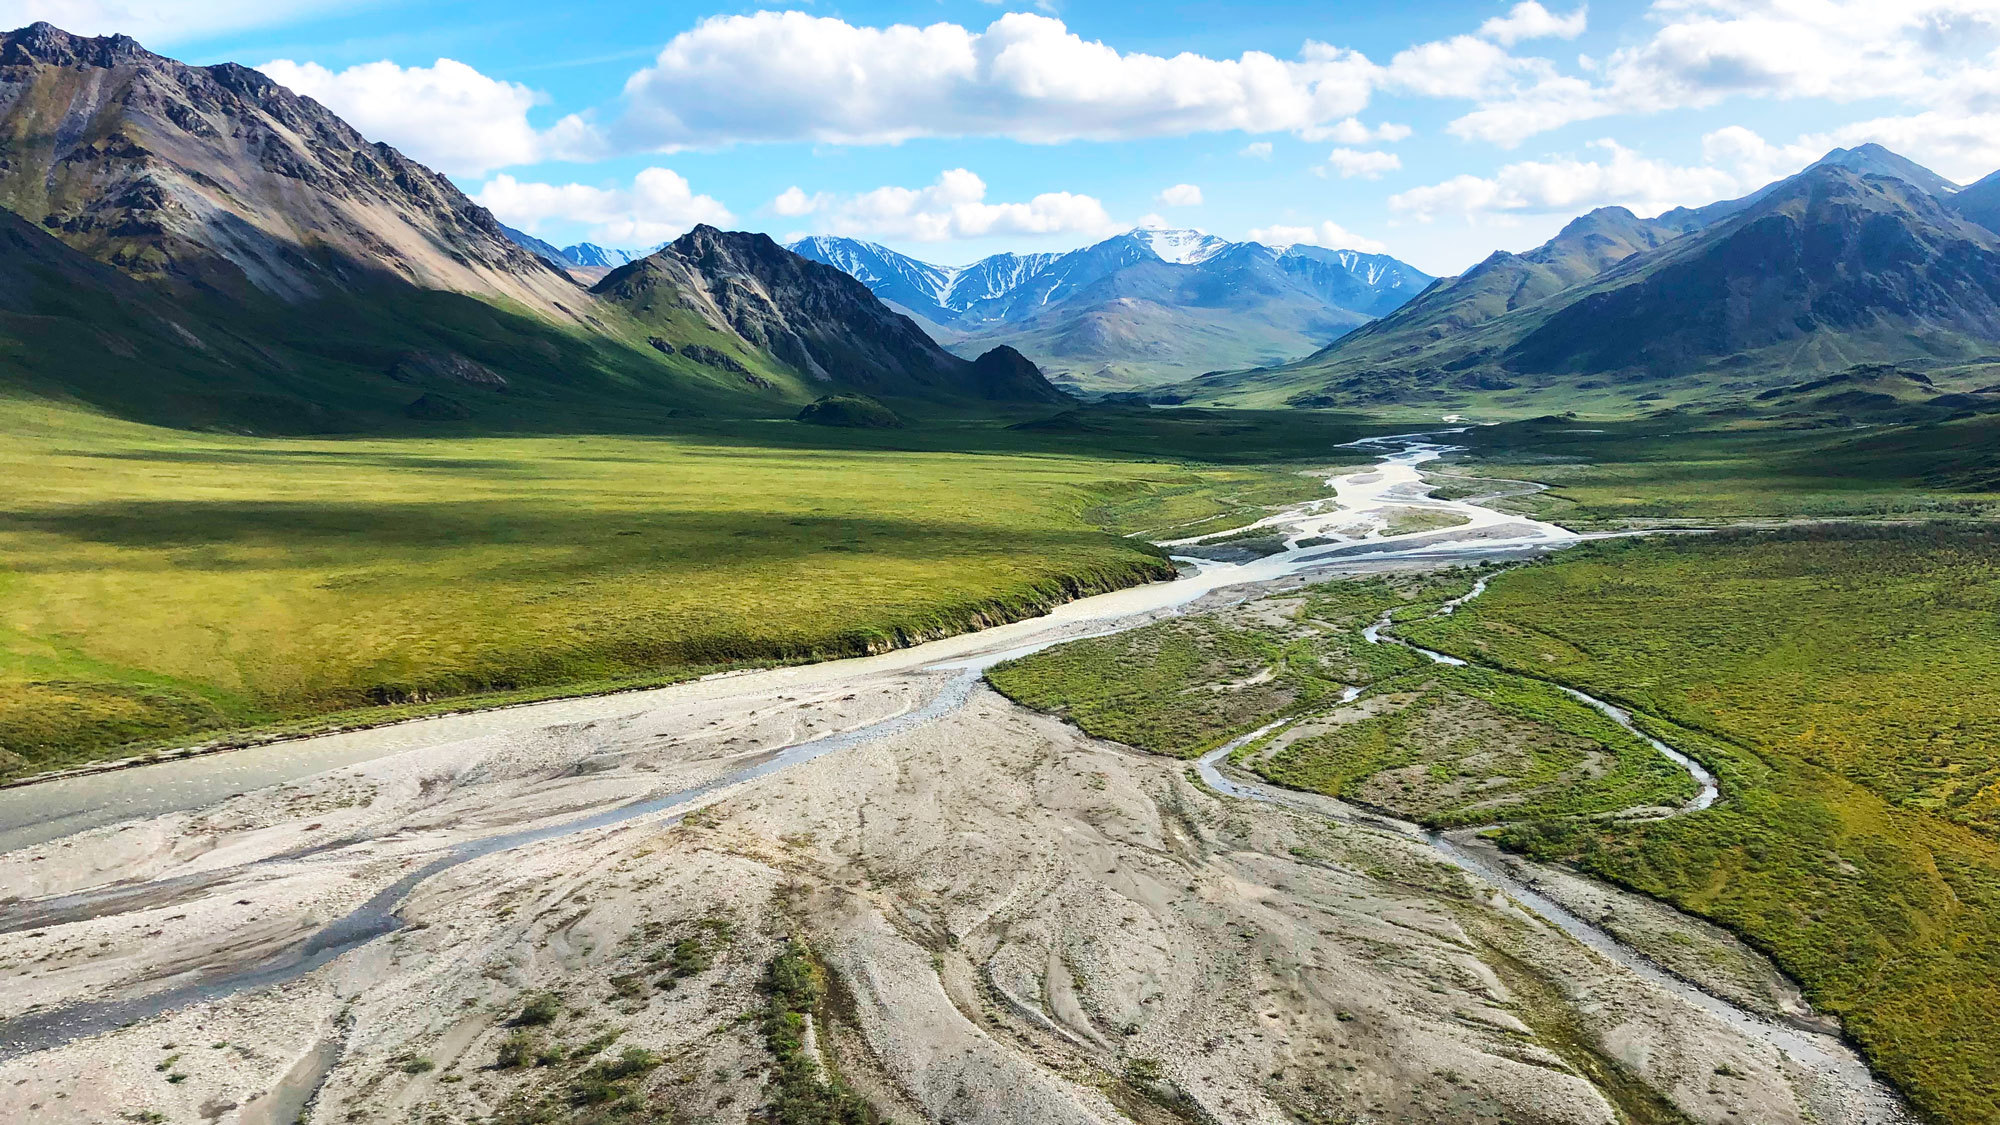 Why Drilling The Arctic Refuge Will Release A Double Dose Of Carbon Yale 60